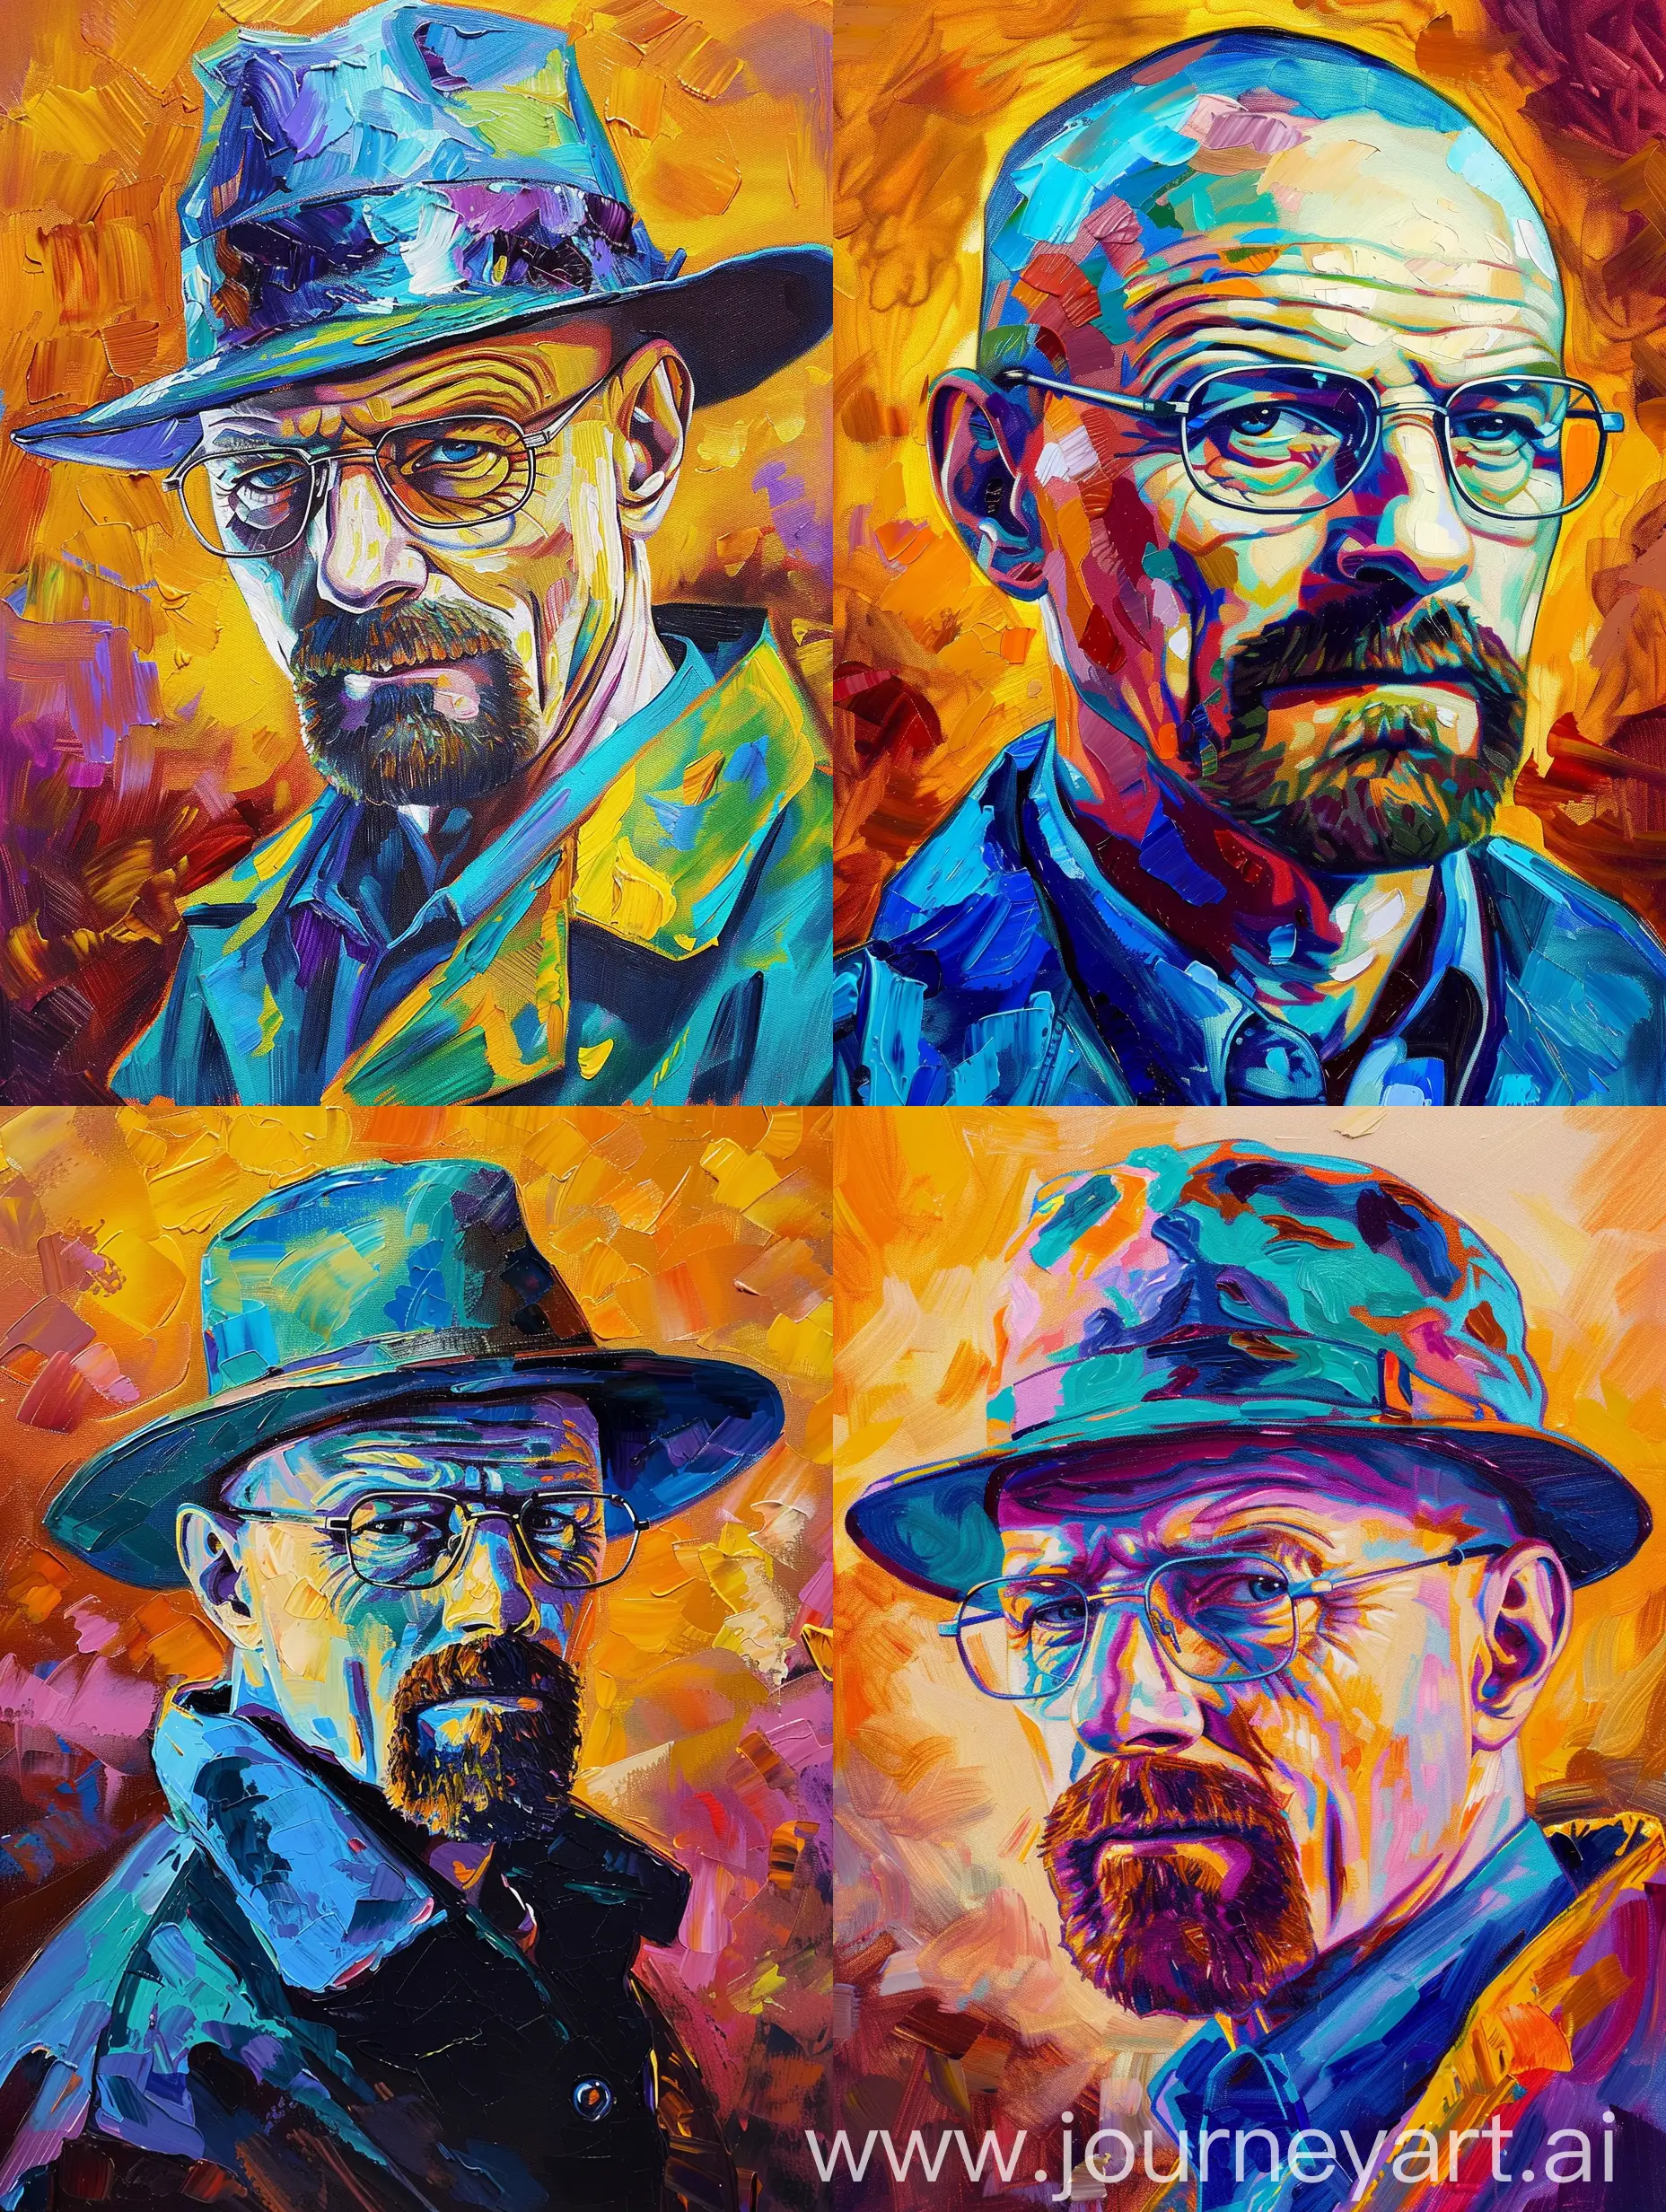 Heisenberg-from-Breaking-Bad-Van-Gogh-Style-Oil-Painting-with-Soft-Pastel-Colors